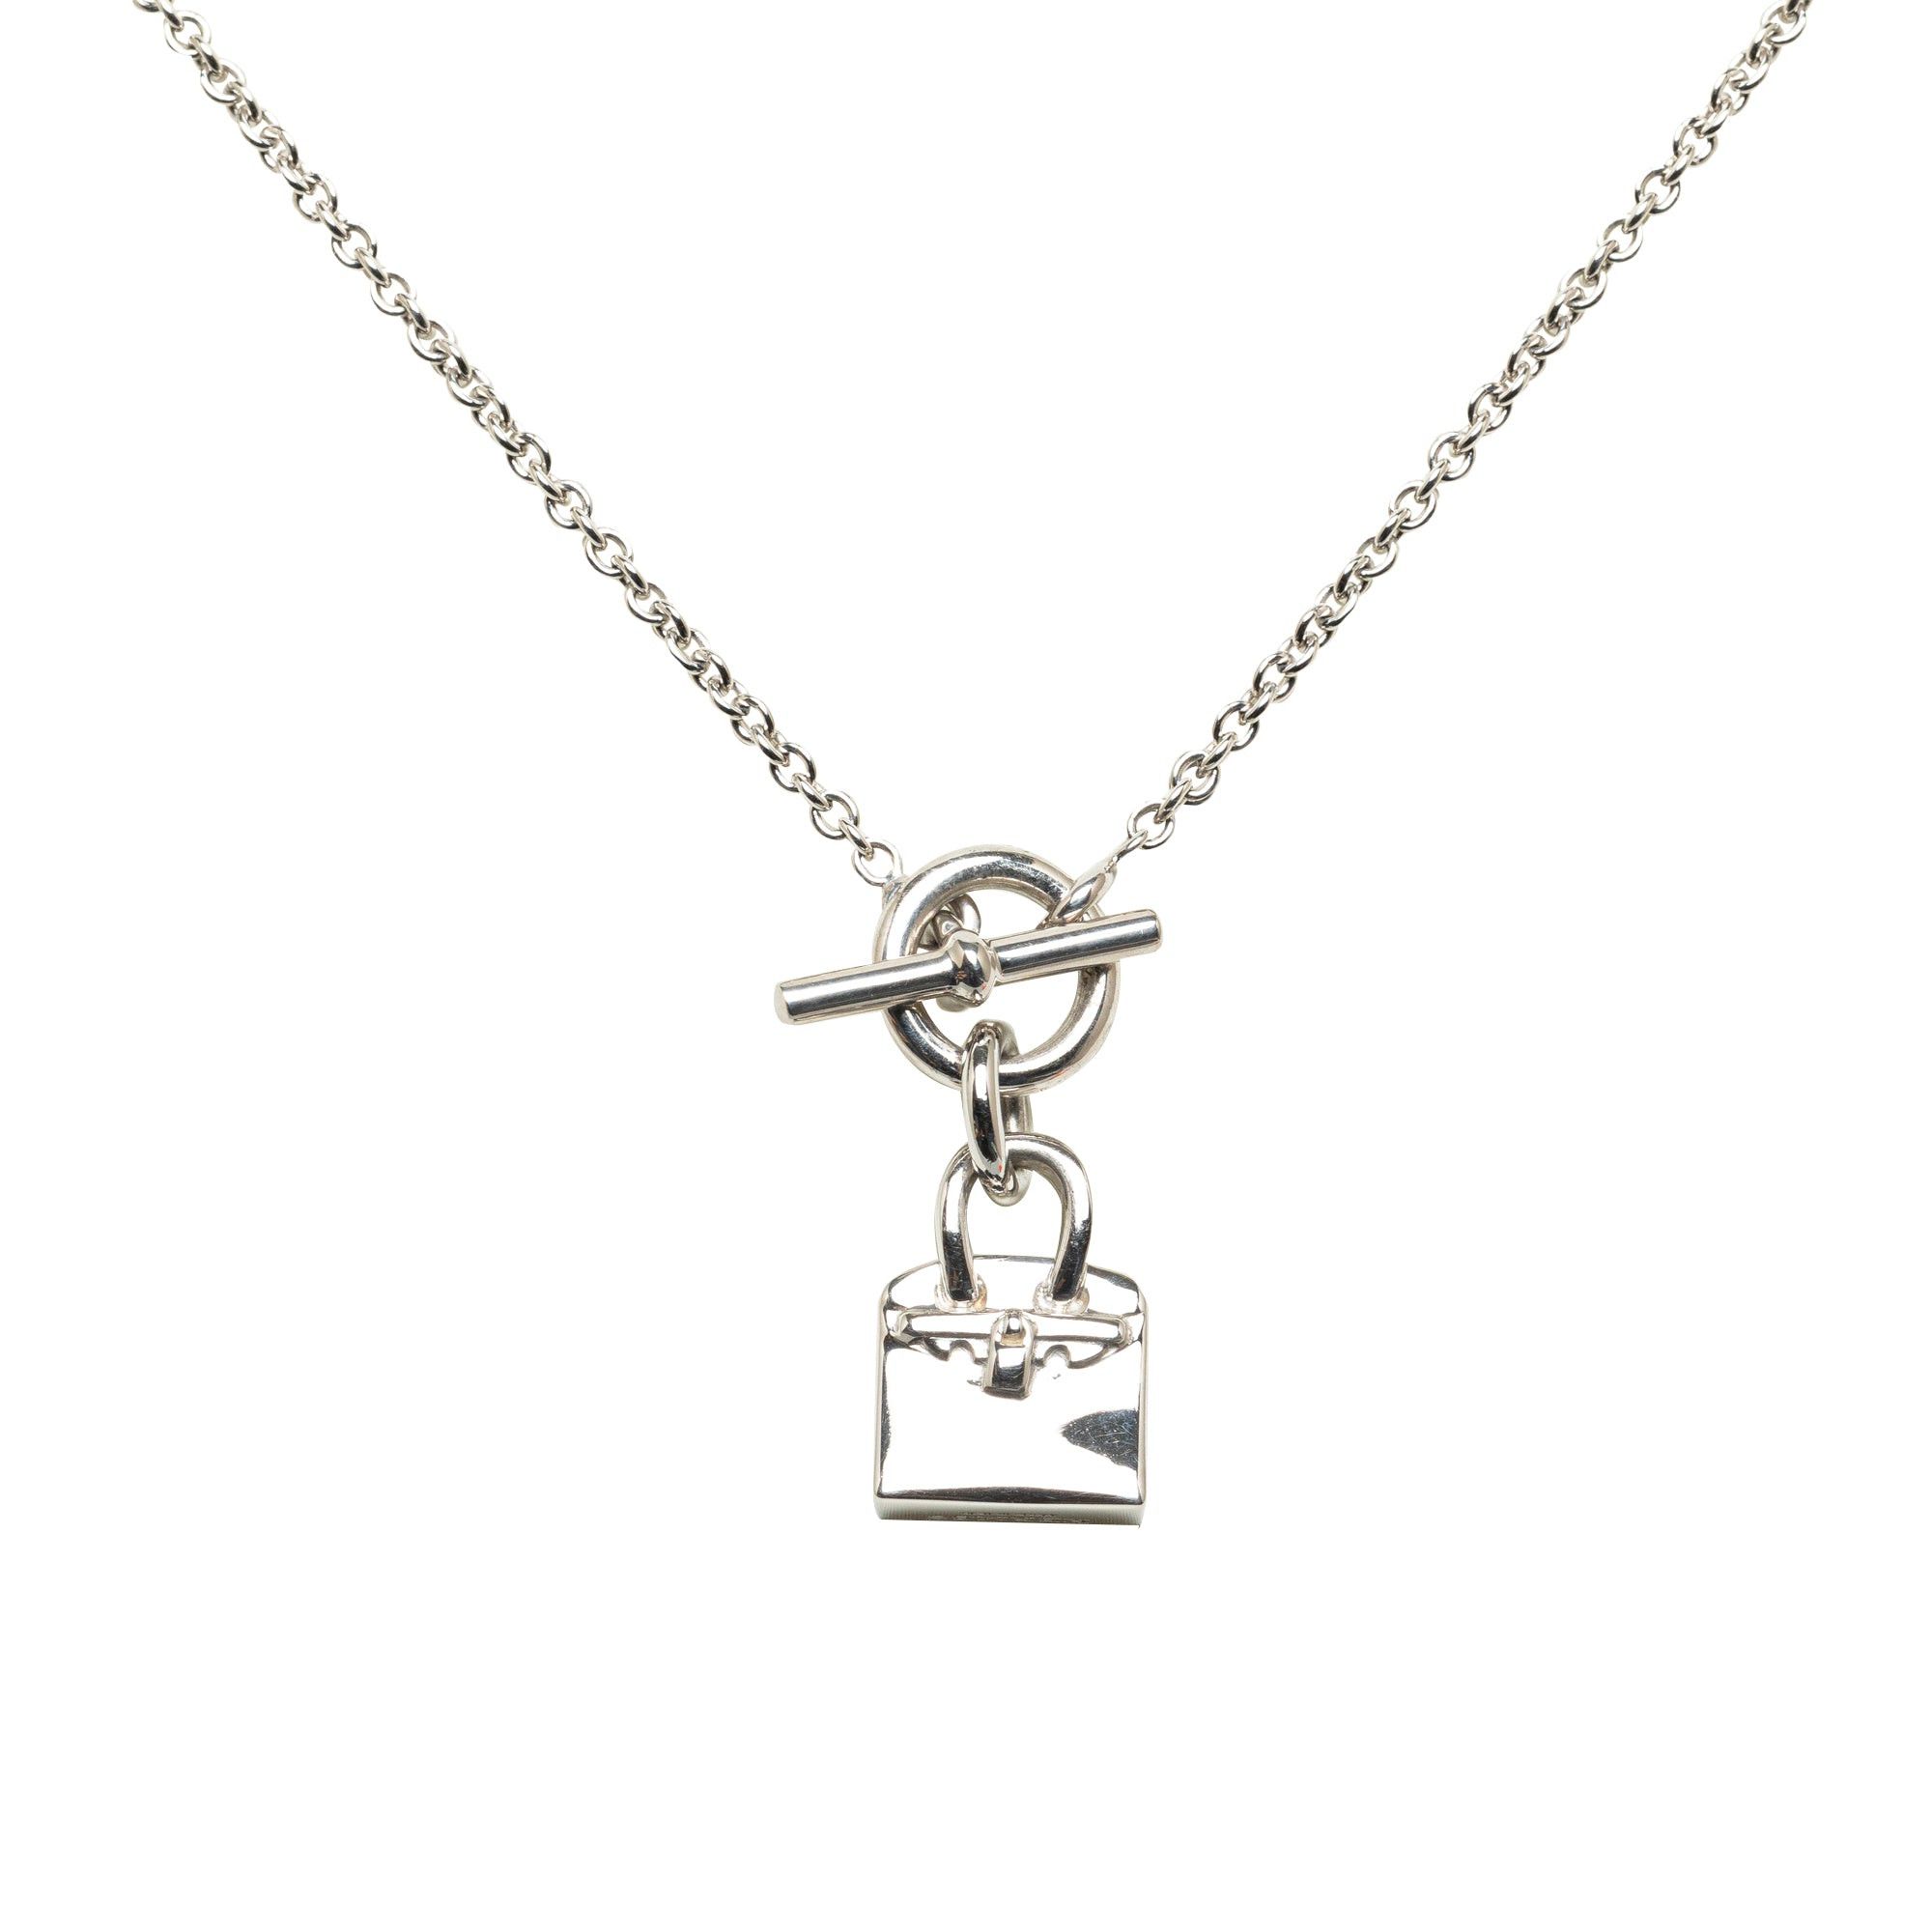 image of Hermes Amulettes Birkin Pendant Necklace Costume Necklace in Silver, Women's